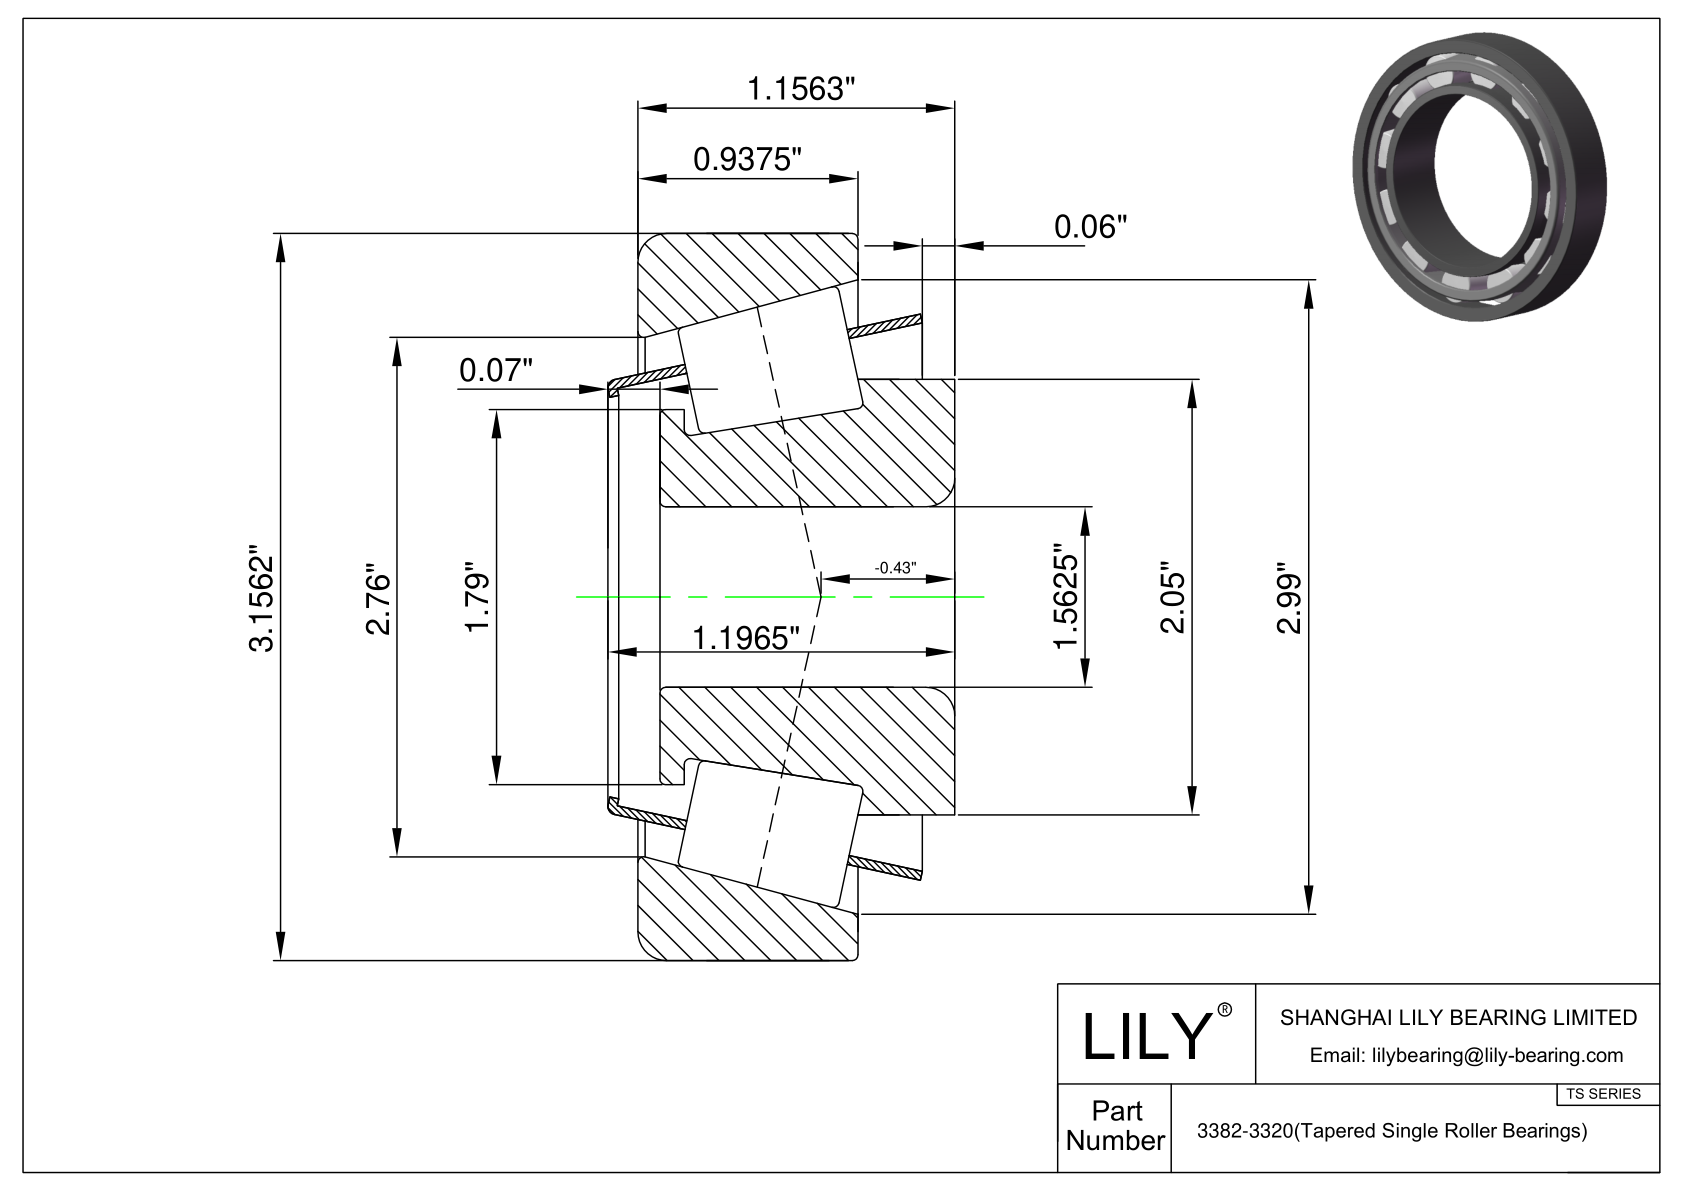 3382-3320 TS (Tapered Single Roller Bearings) (Imperial) cad drawing